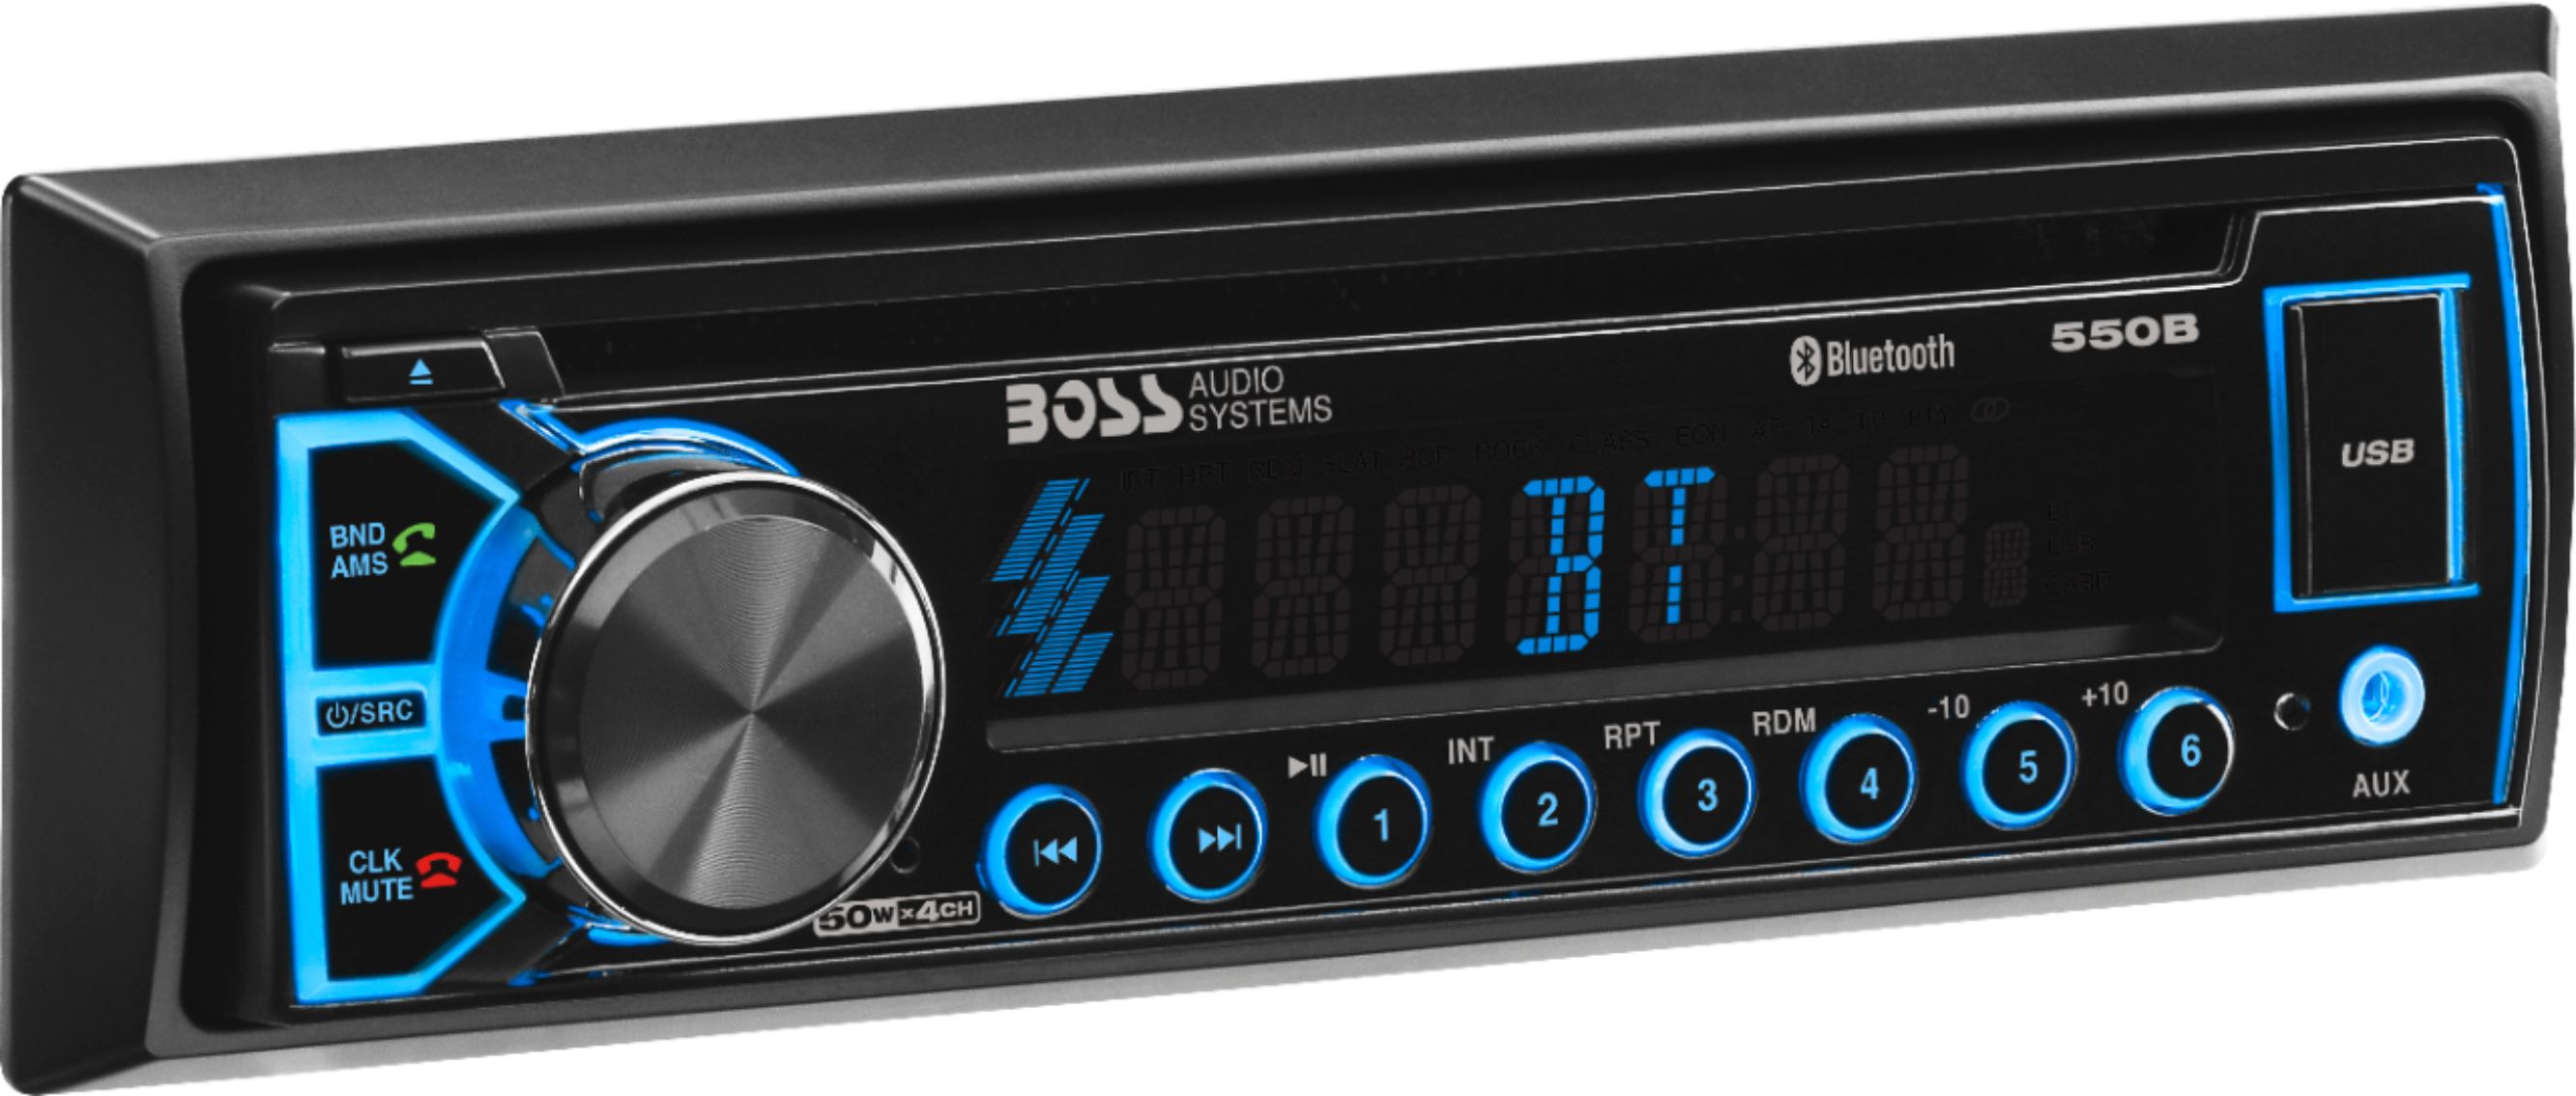 Angle View: BOSS Audio - In-Dash - CD/DM Receiver - Built-in Bluetooth - Black